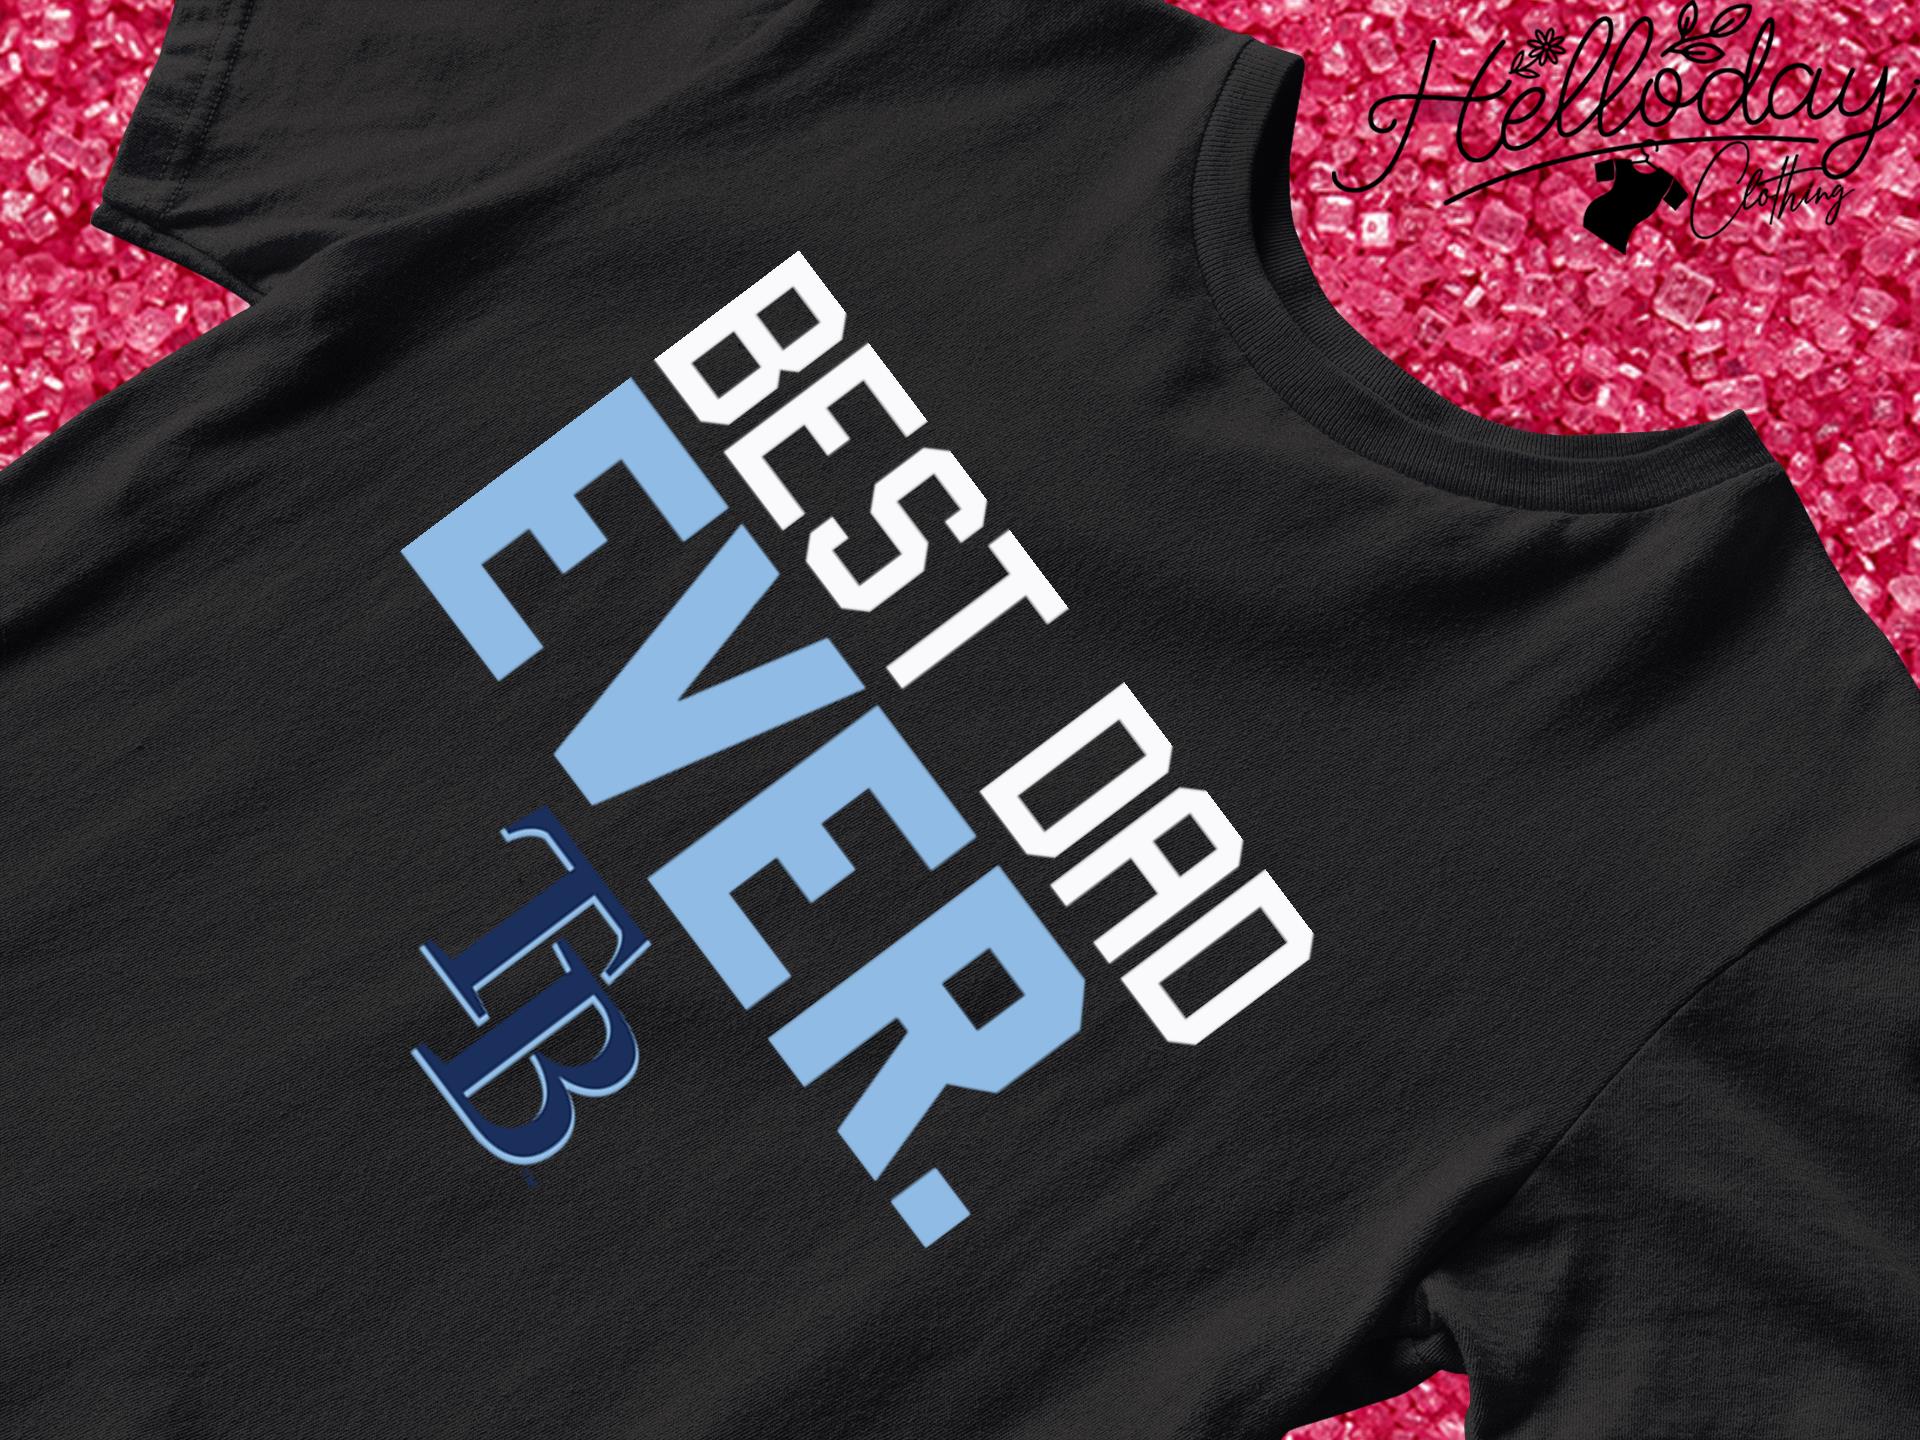 Tampa Bay Rays best dad ever shirt